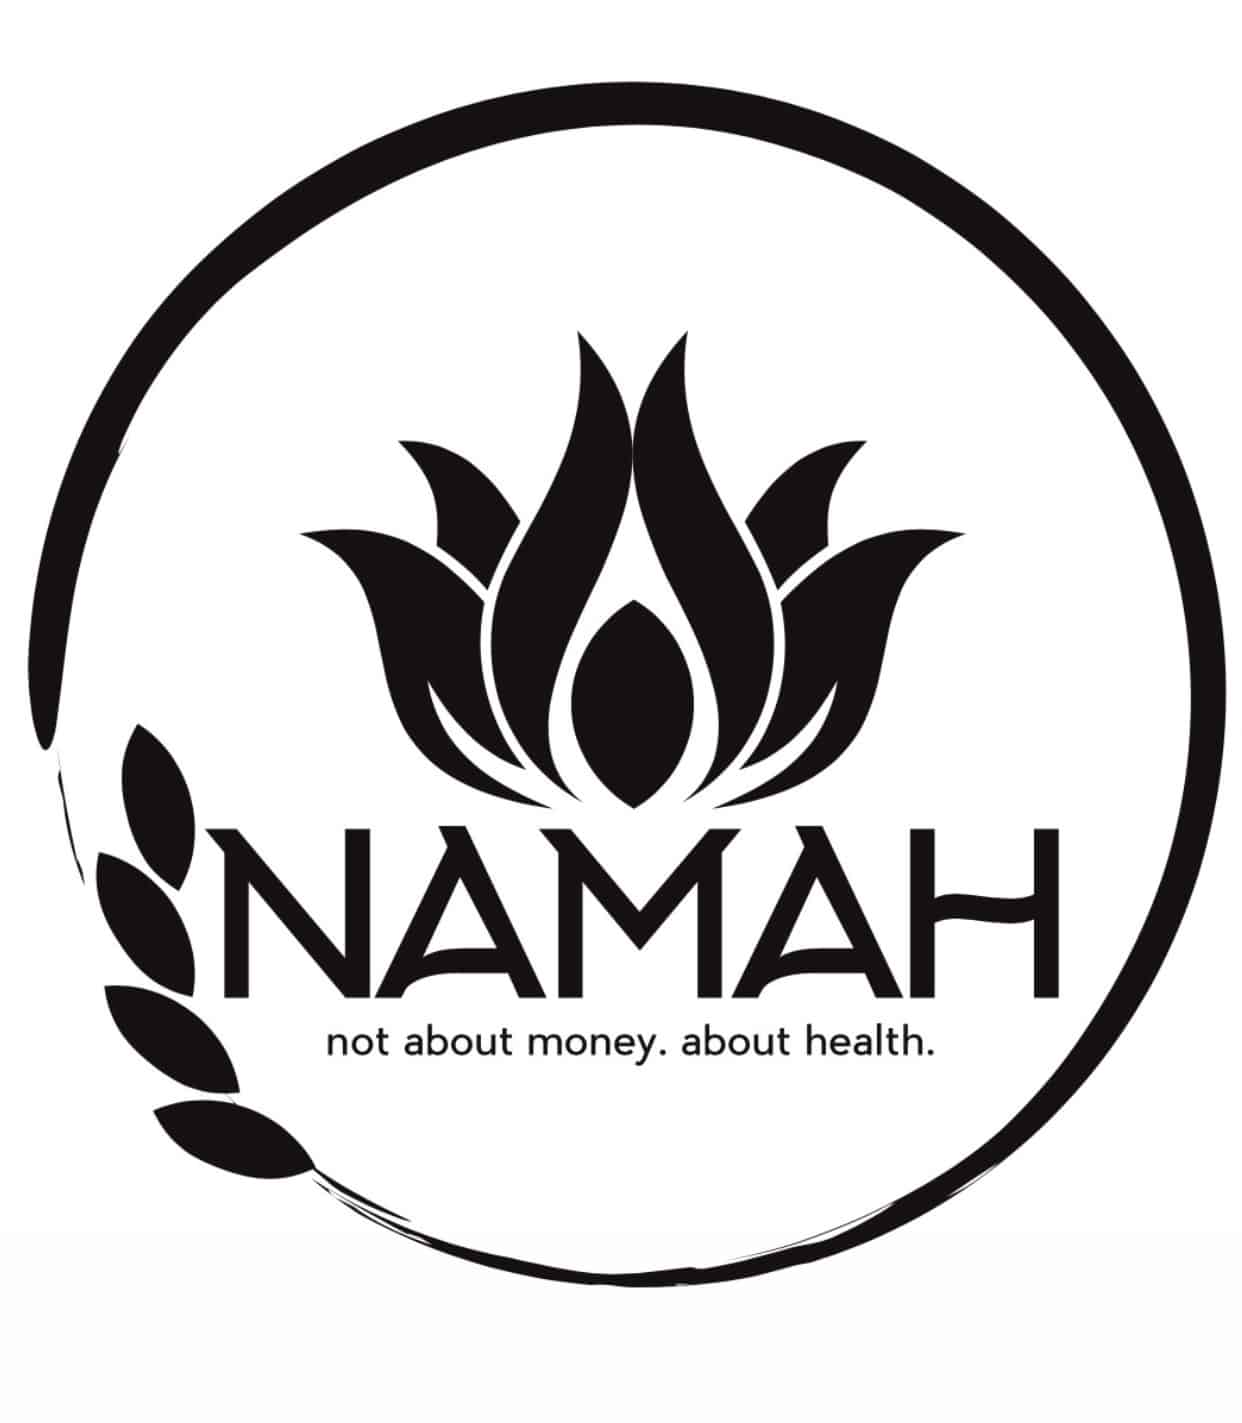 The official logo of NAMAH which is an herbal remedy store in Oklahoma